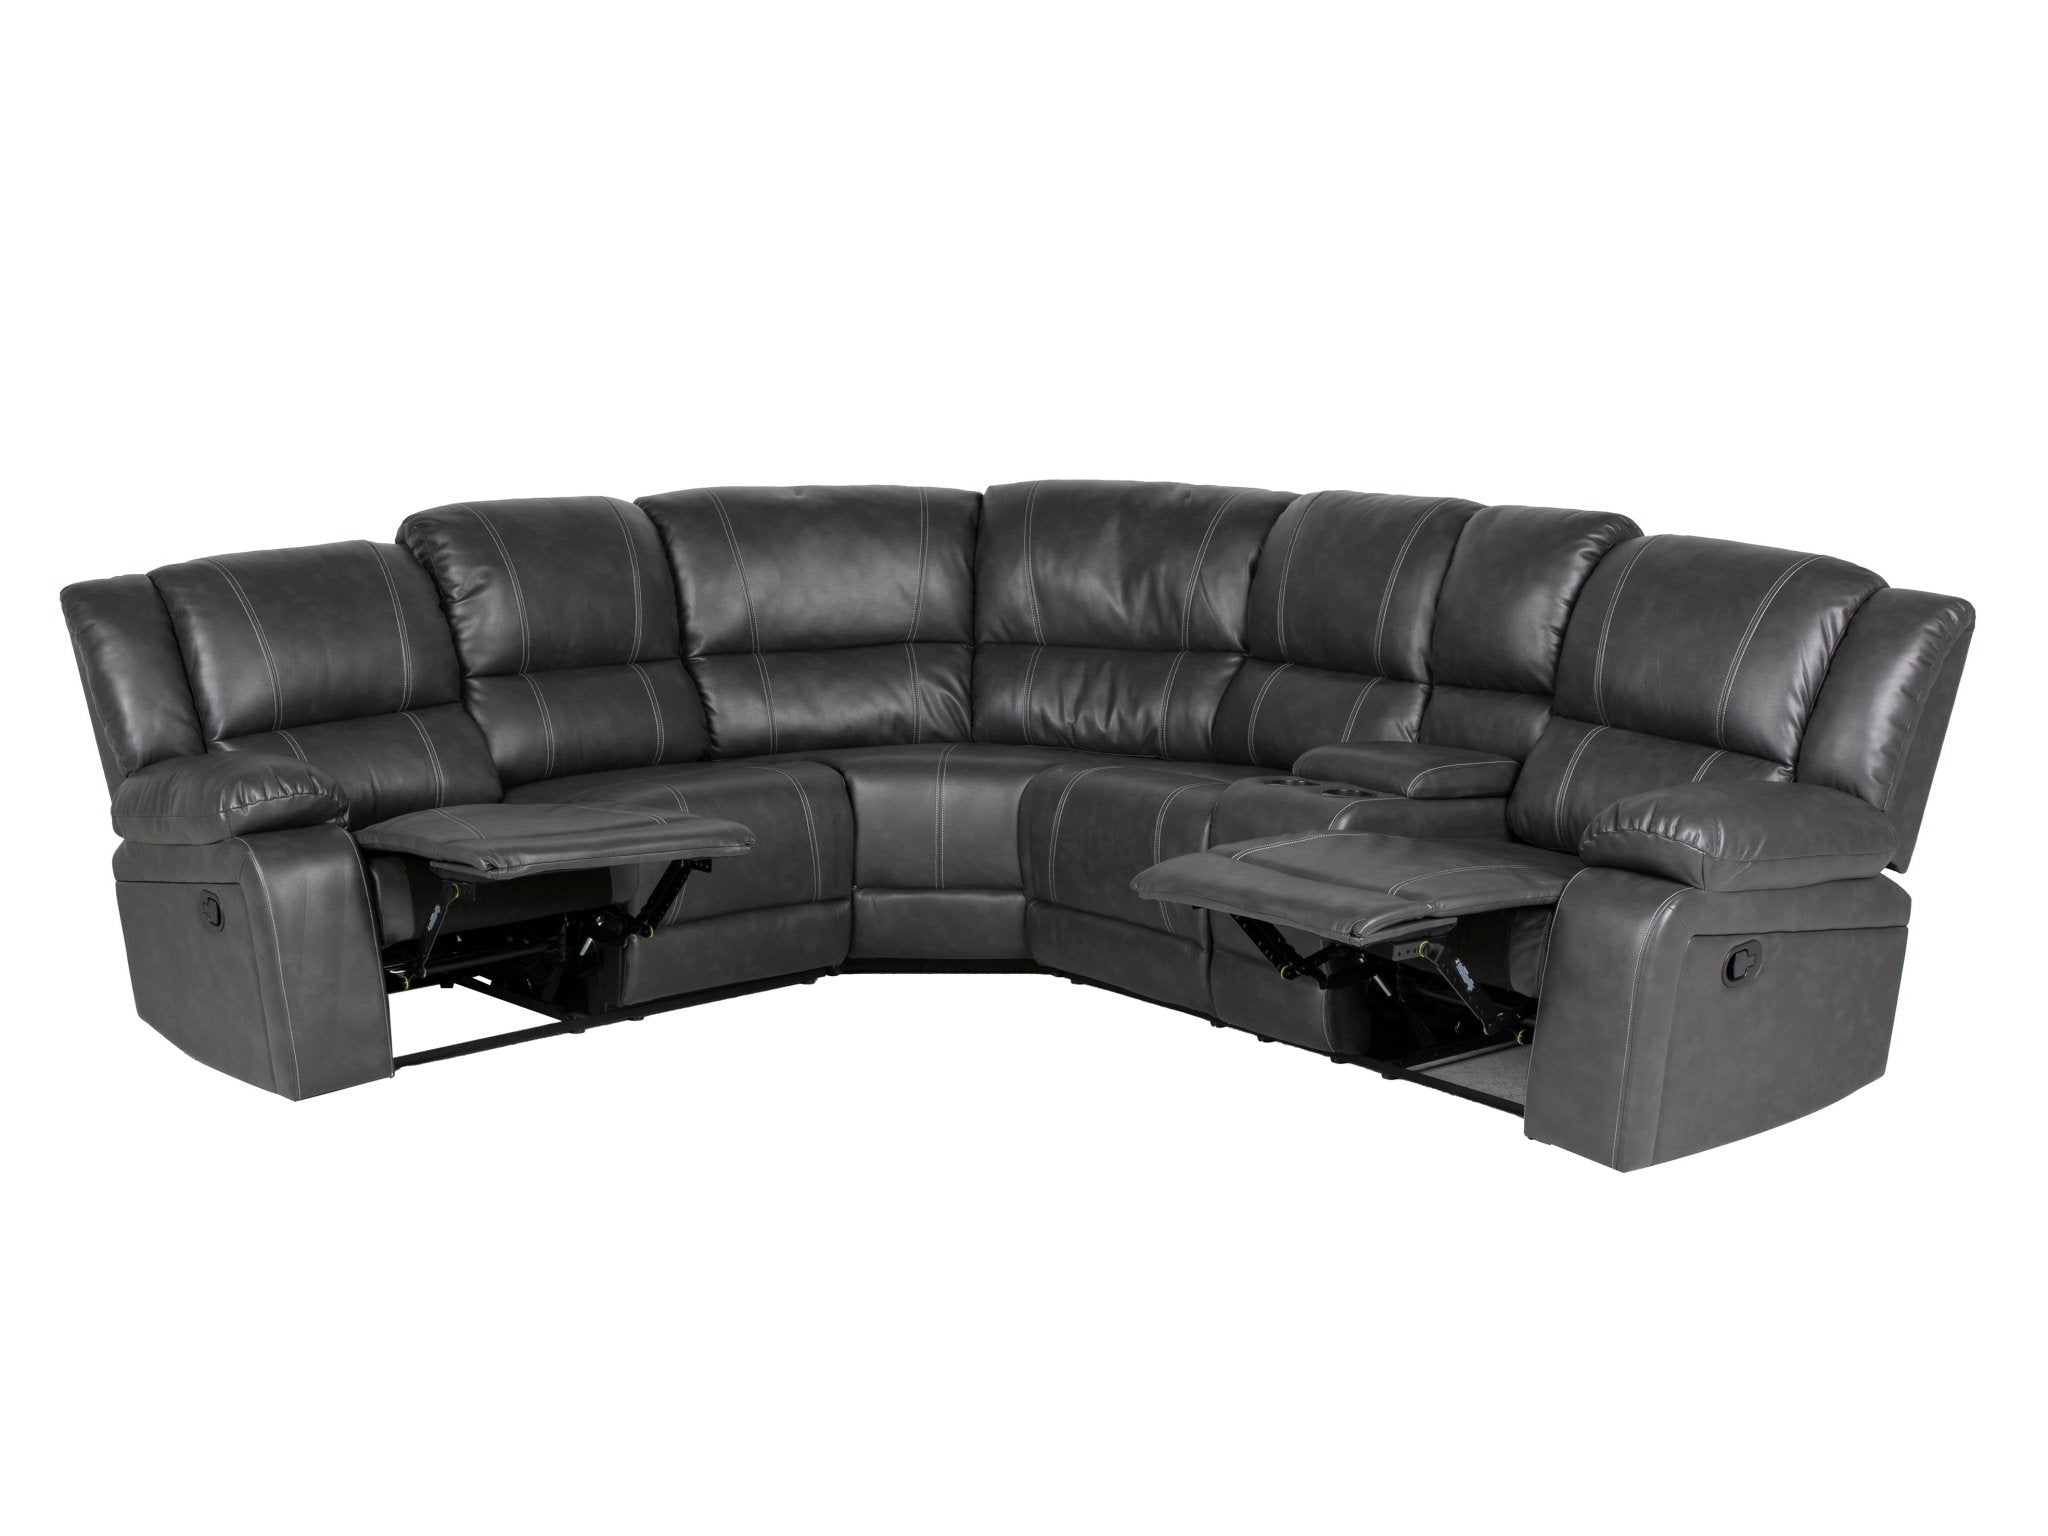 3 PIECE RECLINING SECTIONAL